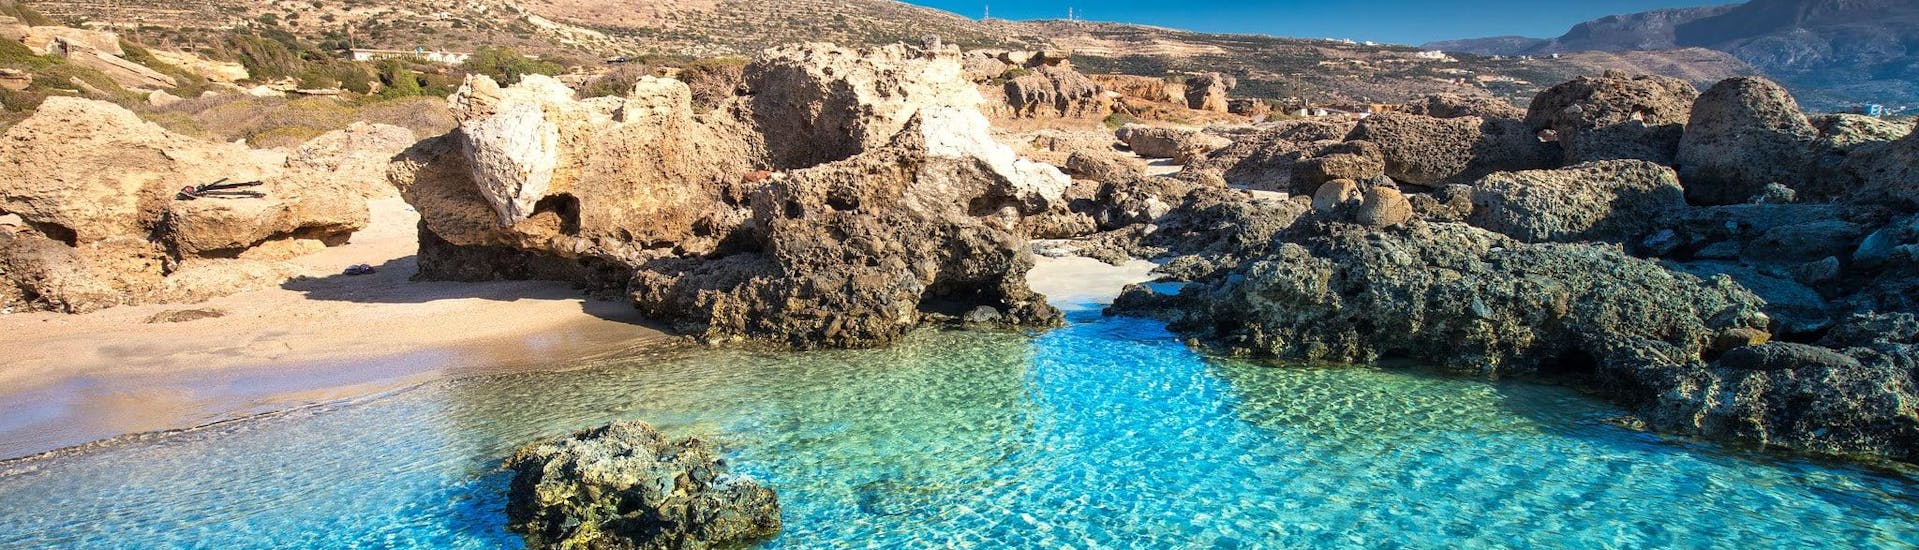 One of the beautiful beaches that can be visited during a boat trip from Ierapetra.